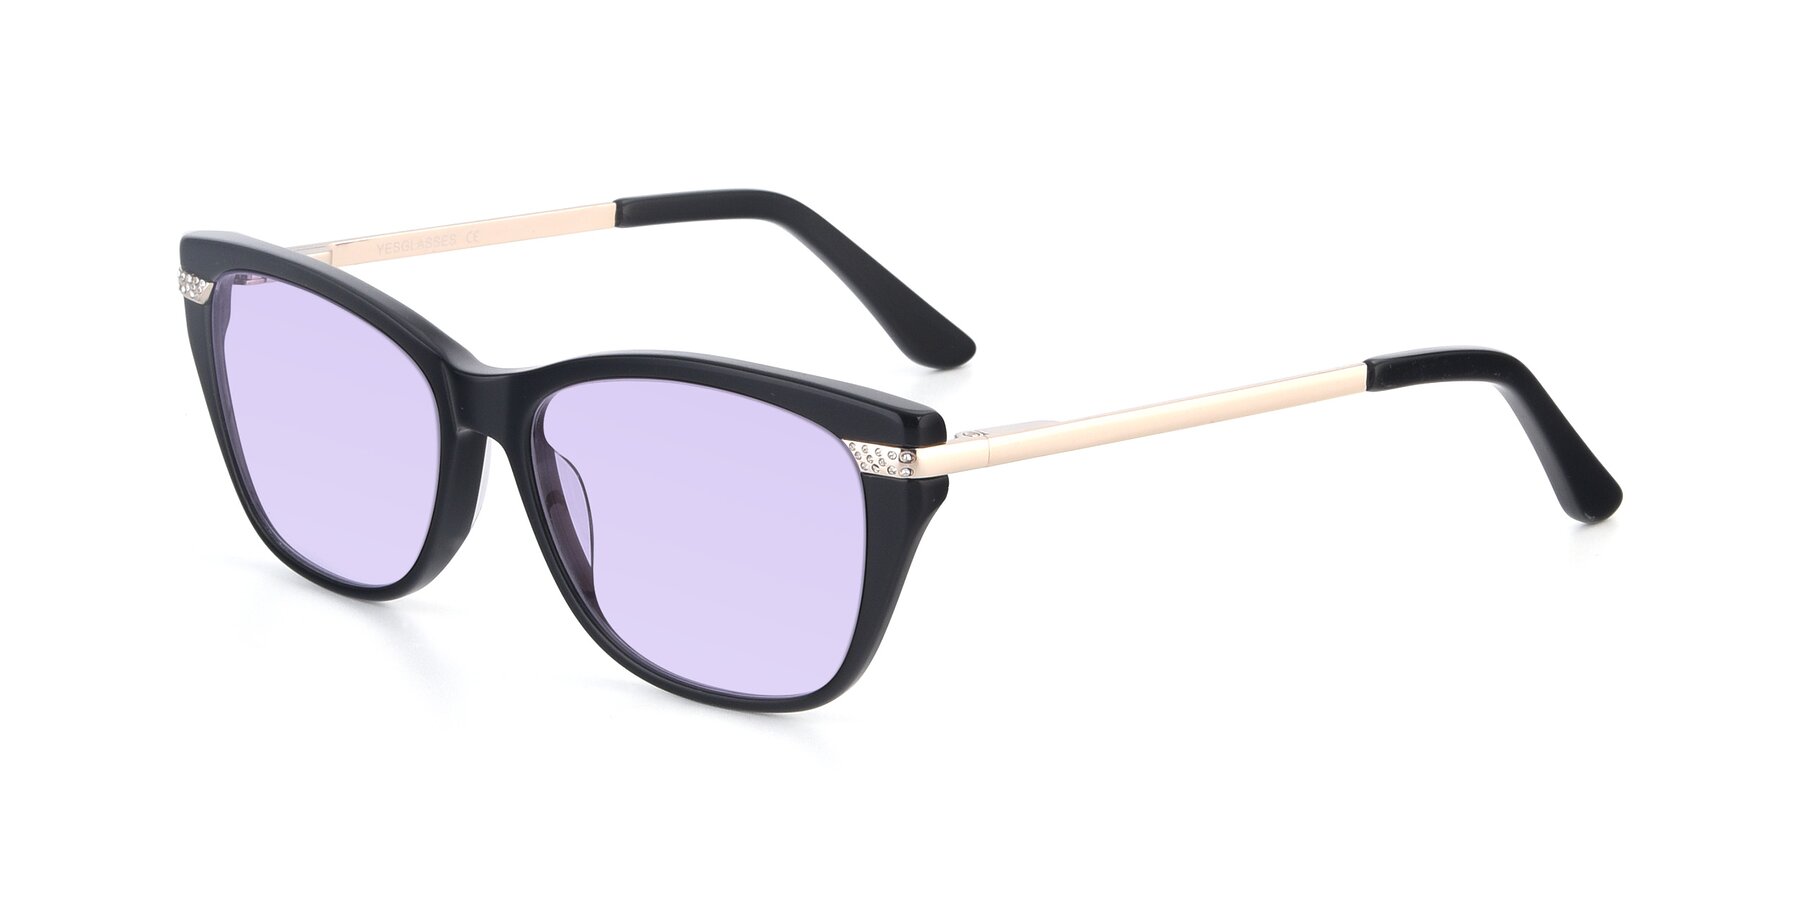 Angle of 17515 in Black with Light Purple Tinted Lenses